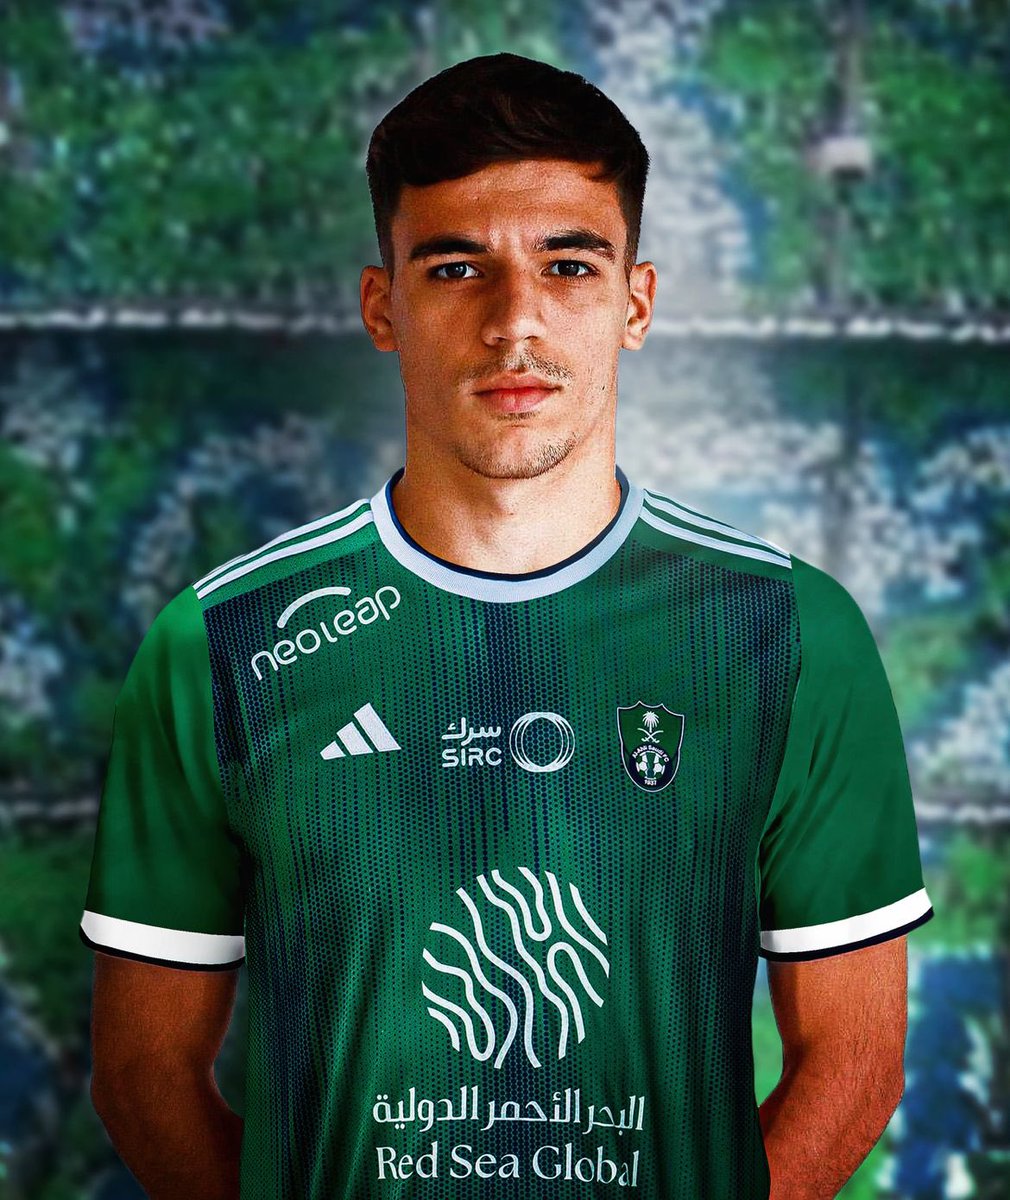 Gabri Veiga has just signed the contract and he’s new Al Ahli player — done deal, here we go confirmed 🚨🟢🇸🇦 #AlAhli

Medical completed tonight, documents signed at 2am CET. Gabri Veiga leaves Celta Vigo and joins Al Ahli as they complete one more huge move.

Signed, sealed 🔒🇪🇸